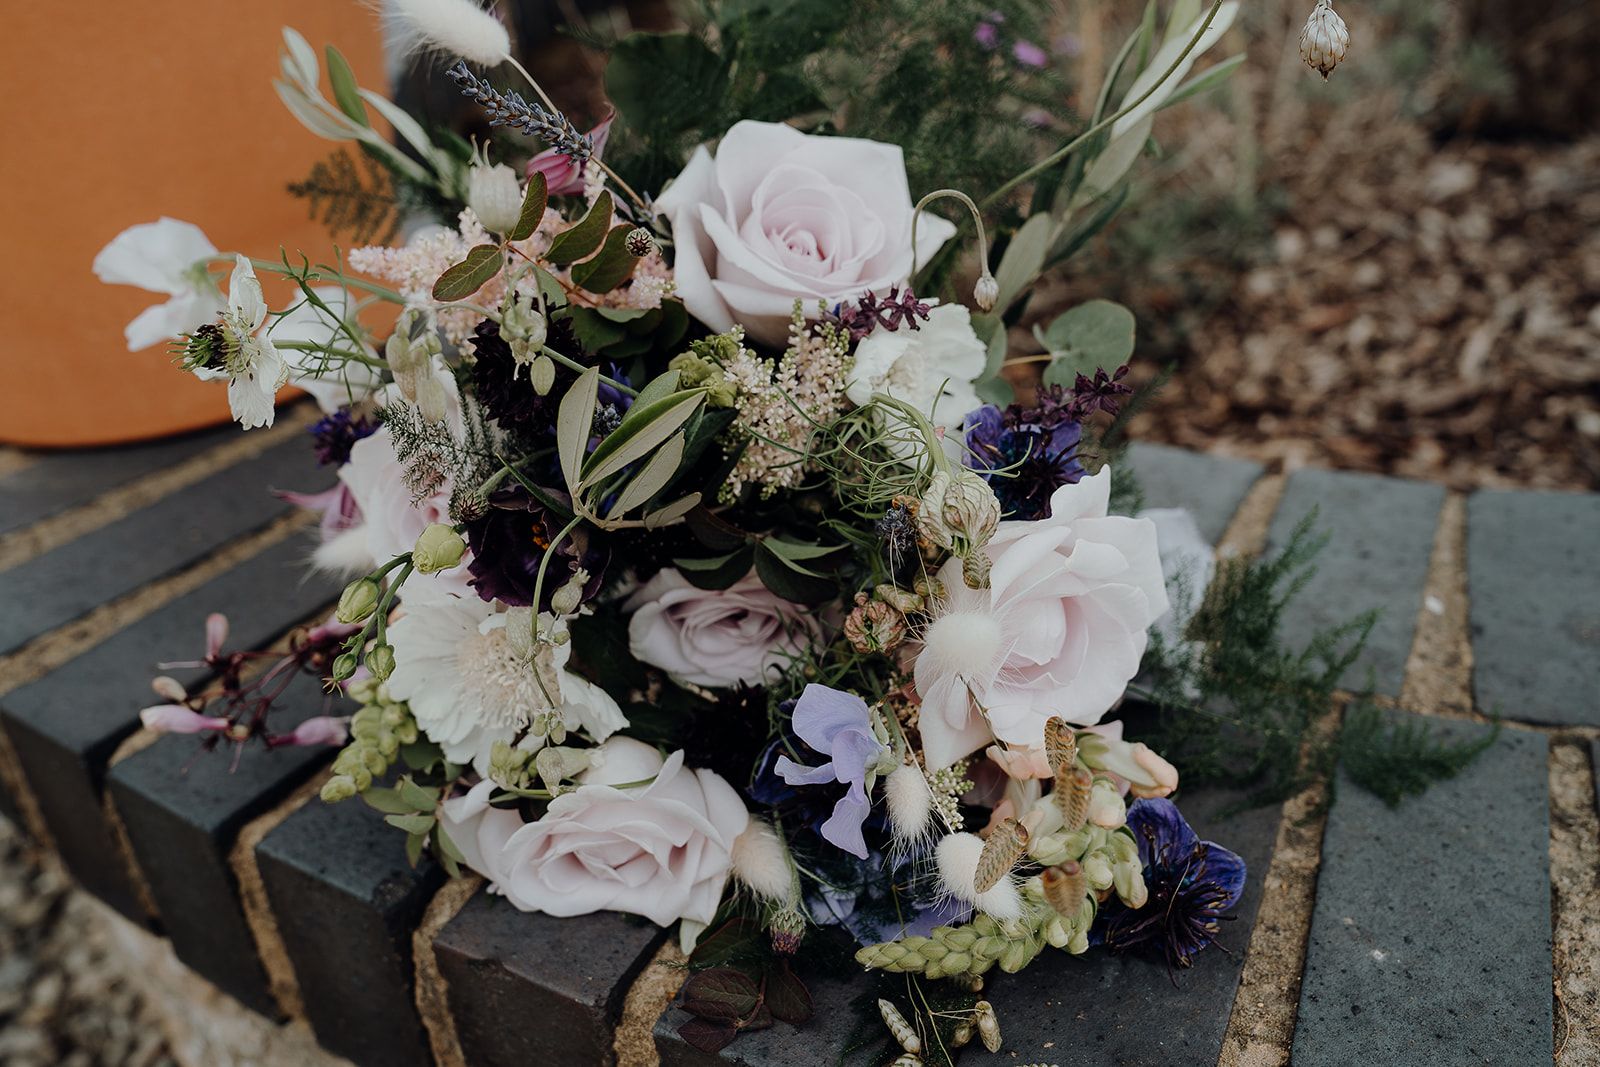 Georgie's stunning bridal bouquet by Bloomers of Brackley including roses, lavender, eucalyptus. Photo thanks to Sam and Steve Photography.